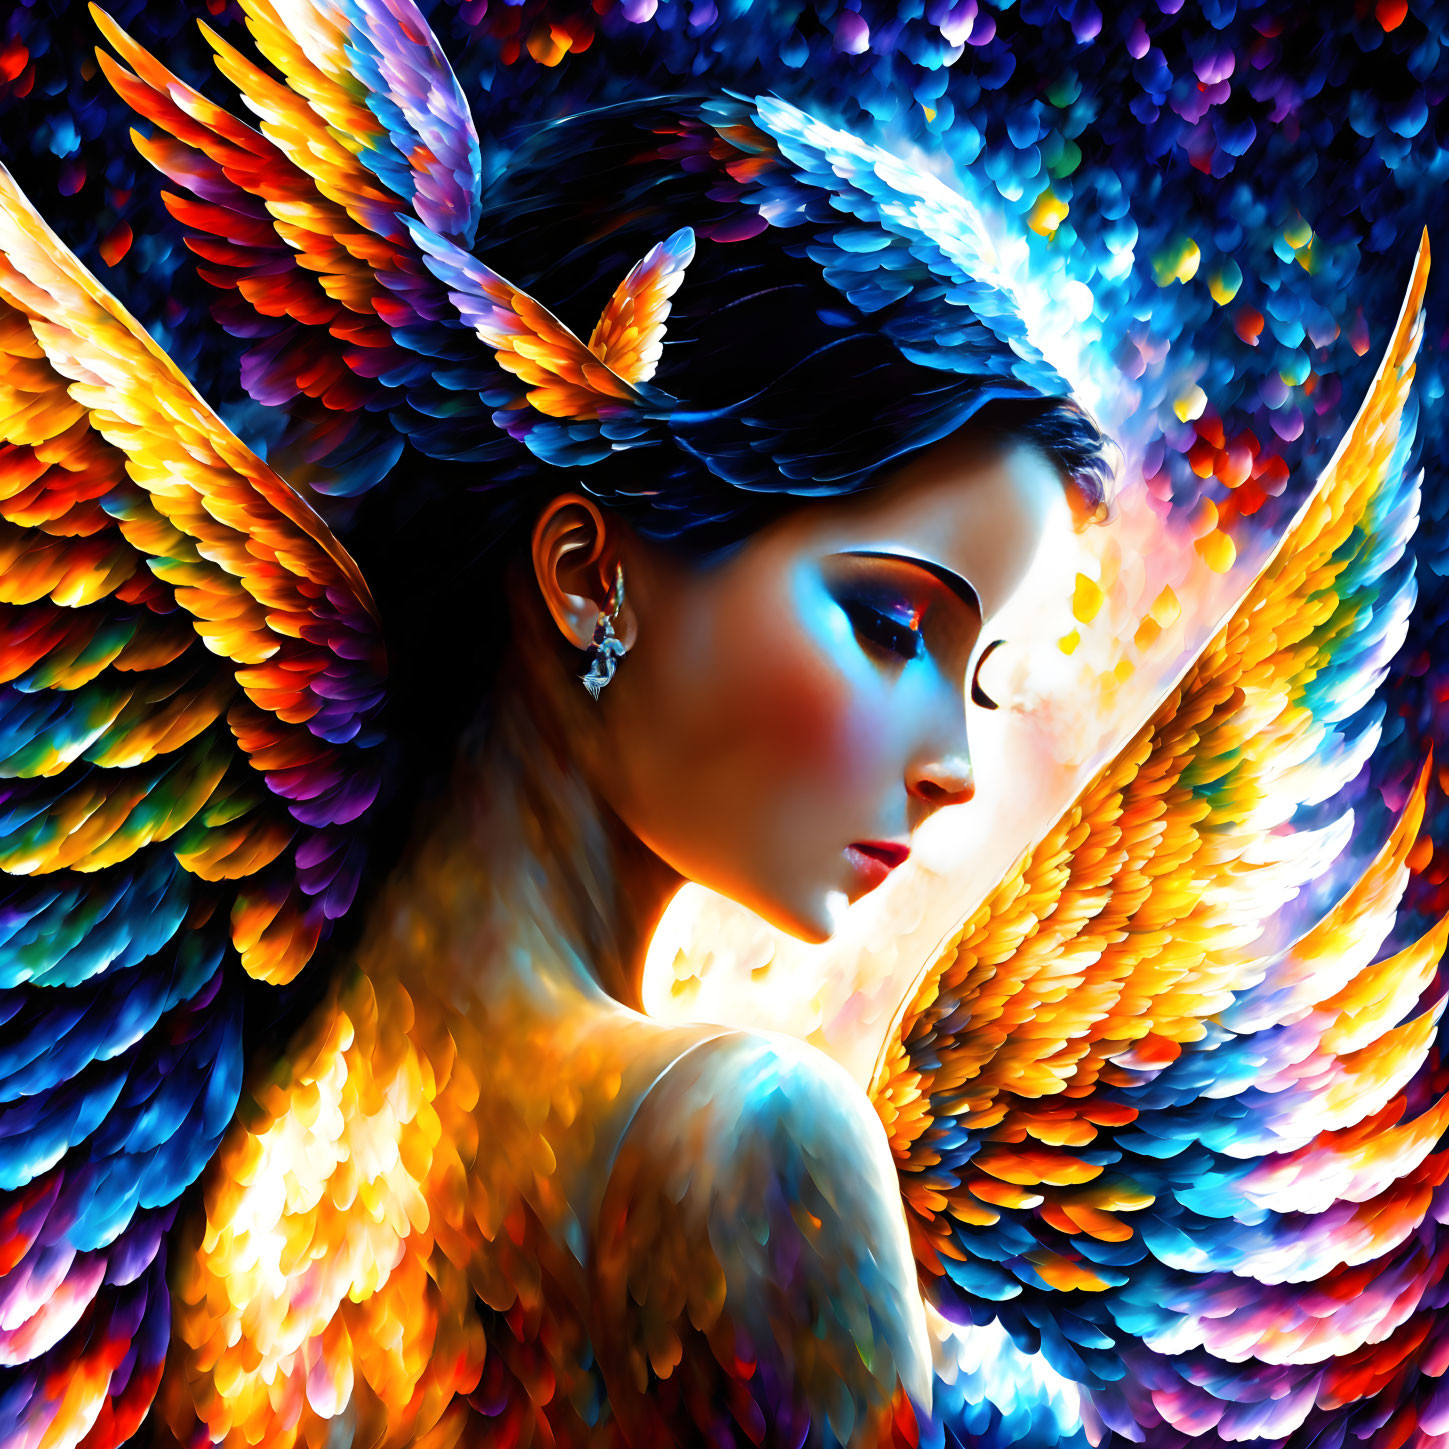 Colorful Digital Art: Woman with Feathered Wings in Profile View